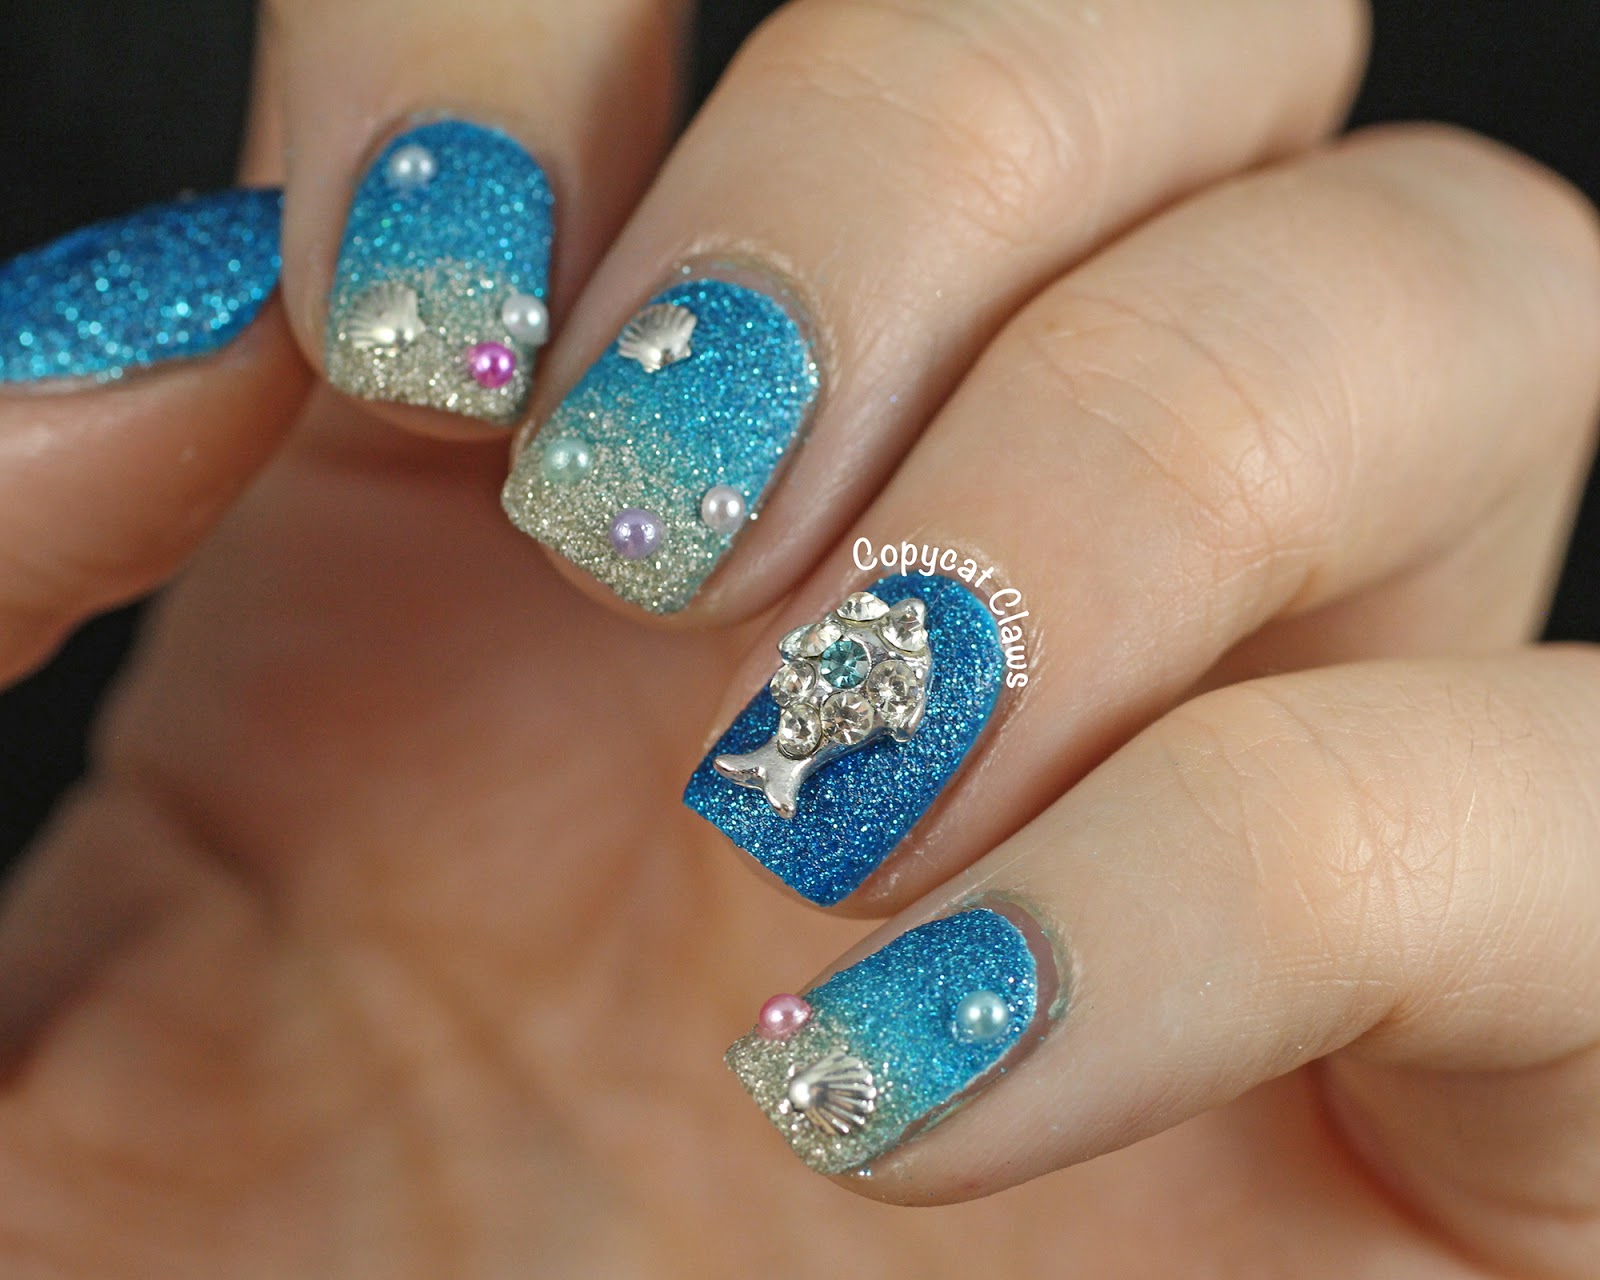 4. Beach-Themed Nail Art for Your Toes - wide 10